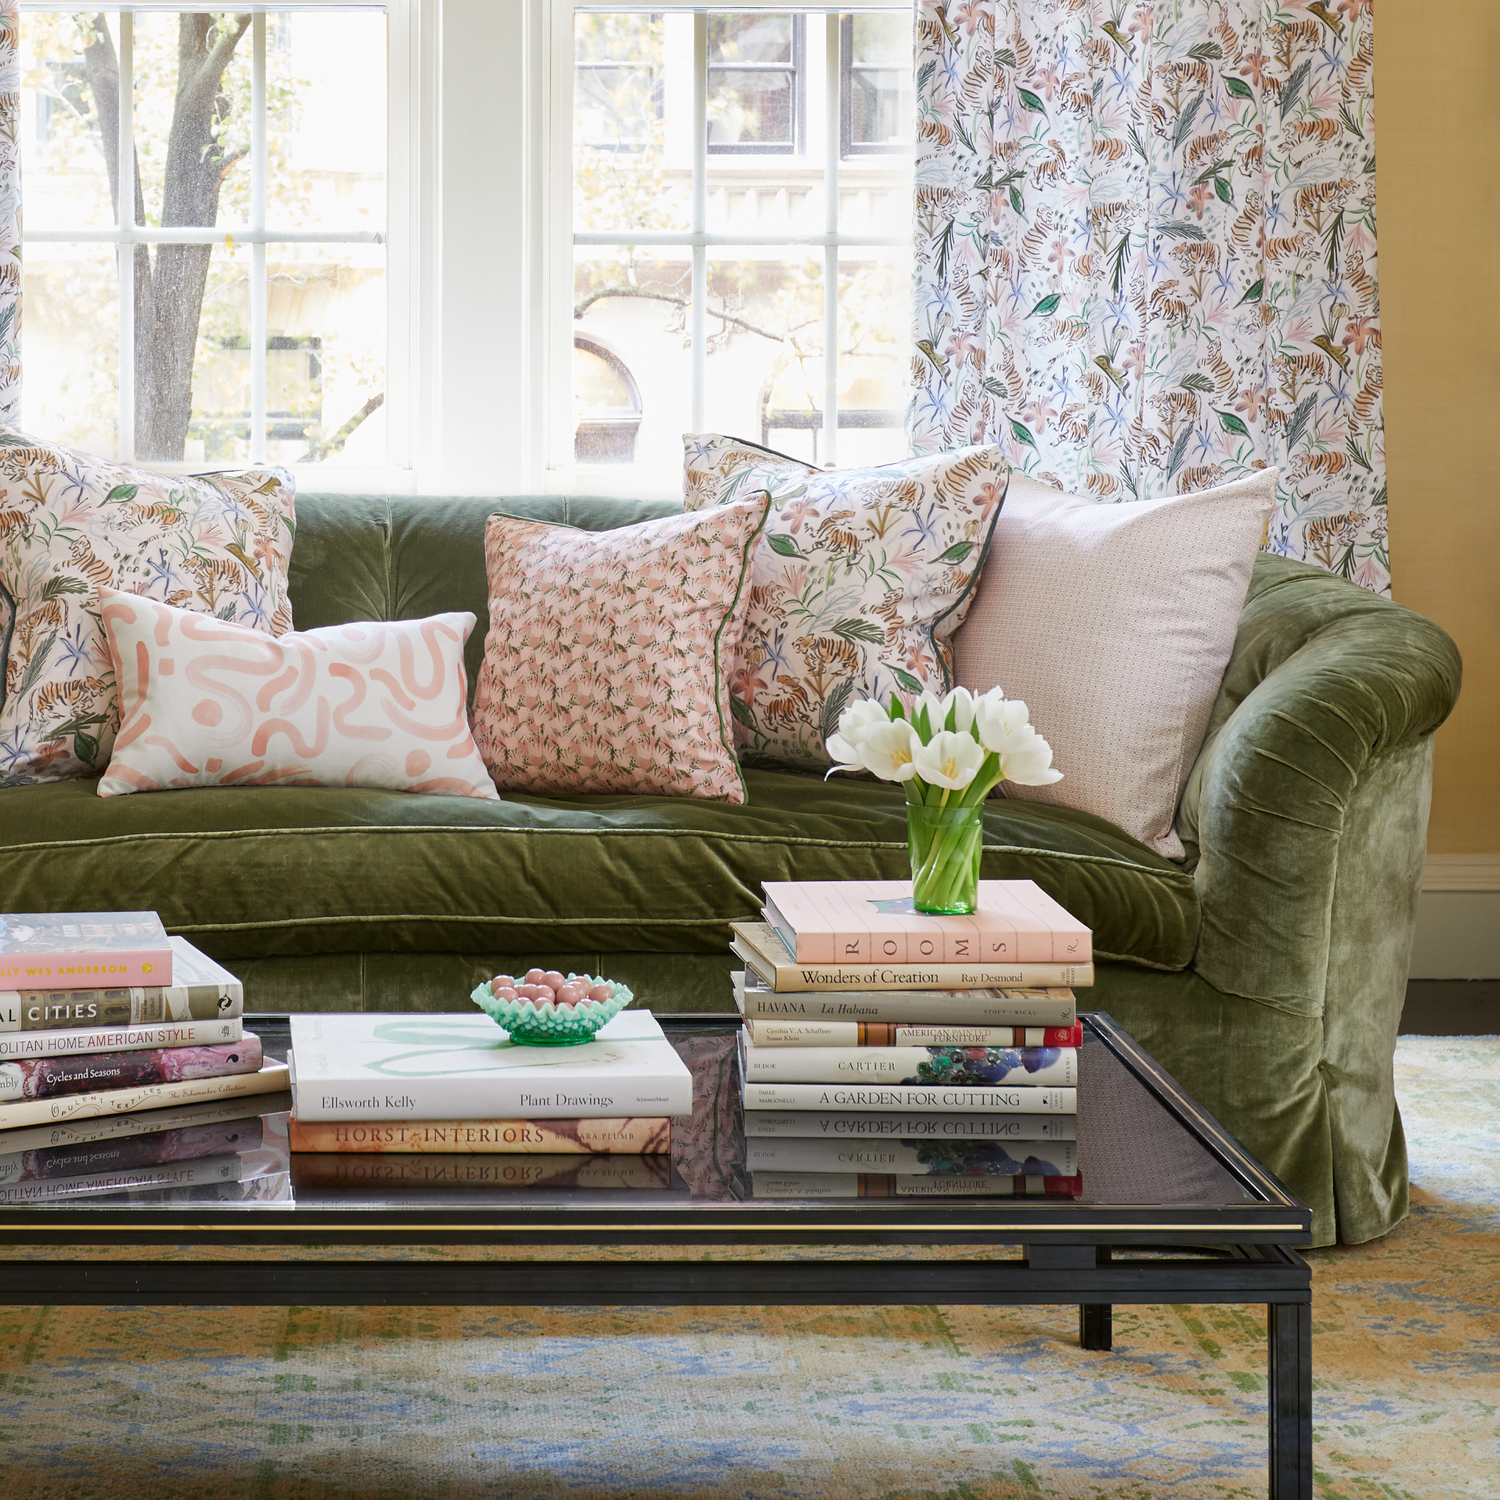 Living room styled with a Pink Geometric printed pillow, Pink Chinoiserie printed pillow, Pink Floral printed pillow, and Pink Graphic printed lumbar on Fern Green Velvet couch by coffee table with stacked books and white tulips in vase in front of an illuminated window with Cream Chinoiserie printed curtains 